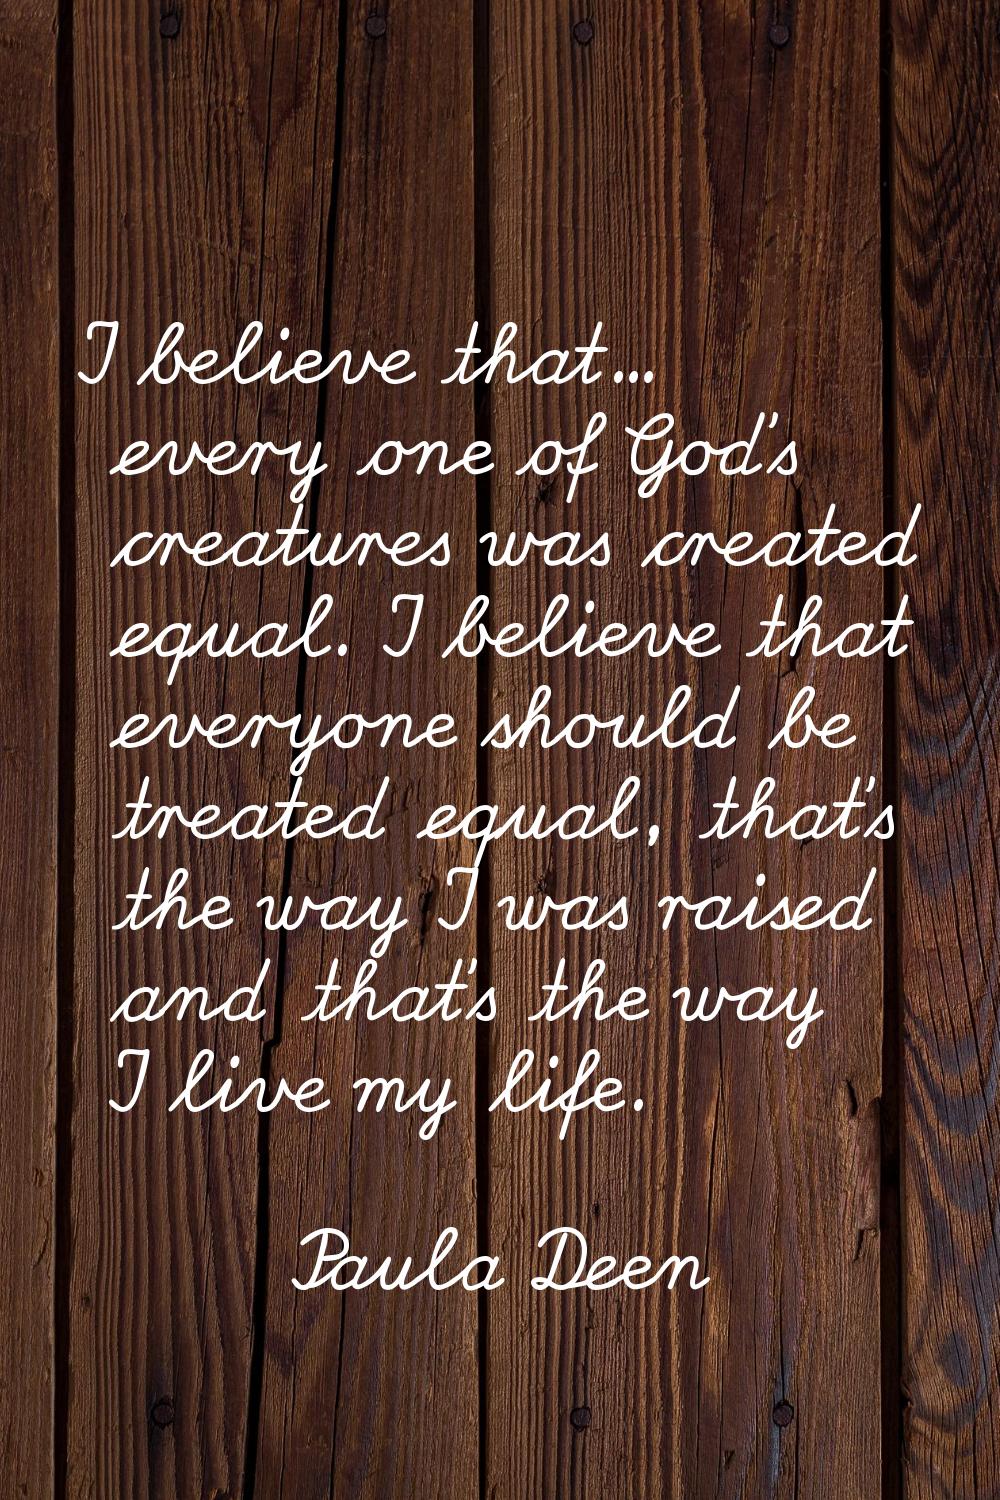 I believe that... every one of God's creatures was created equal. I believe that everyone should be